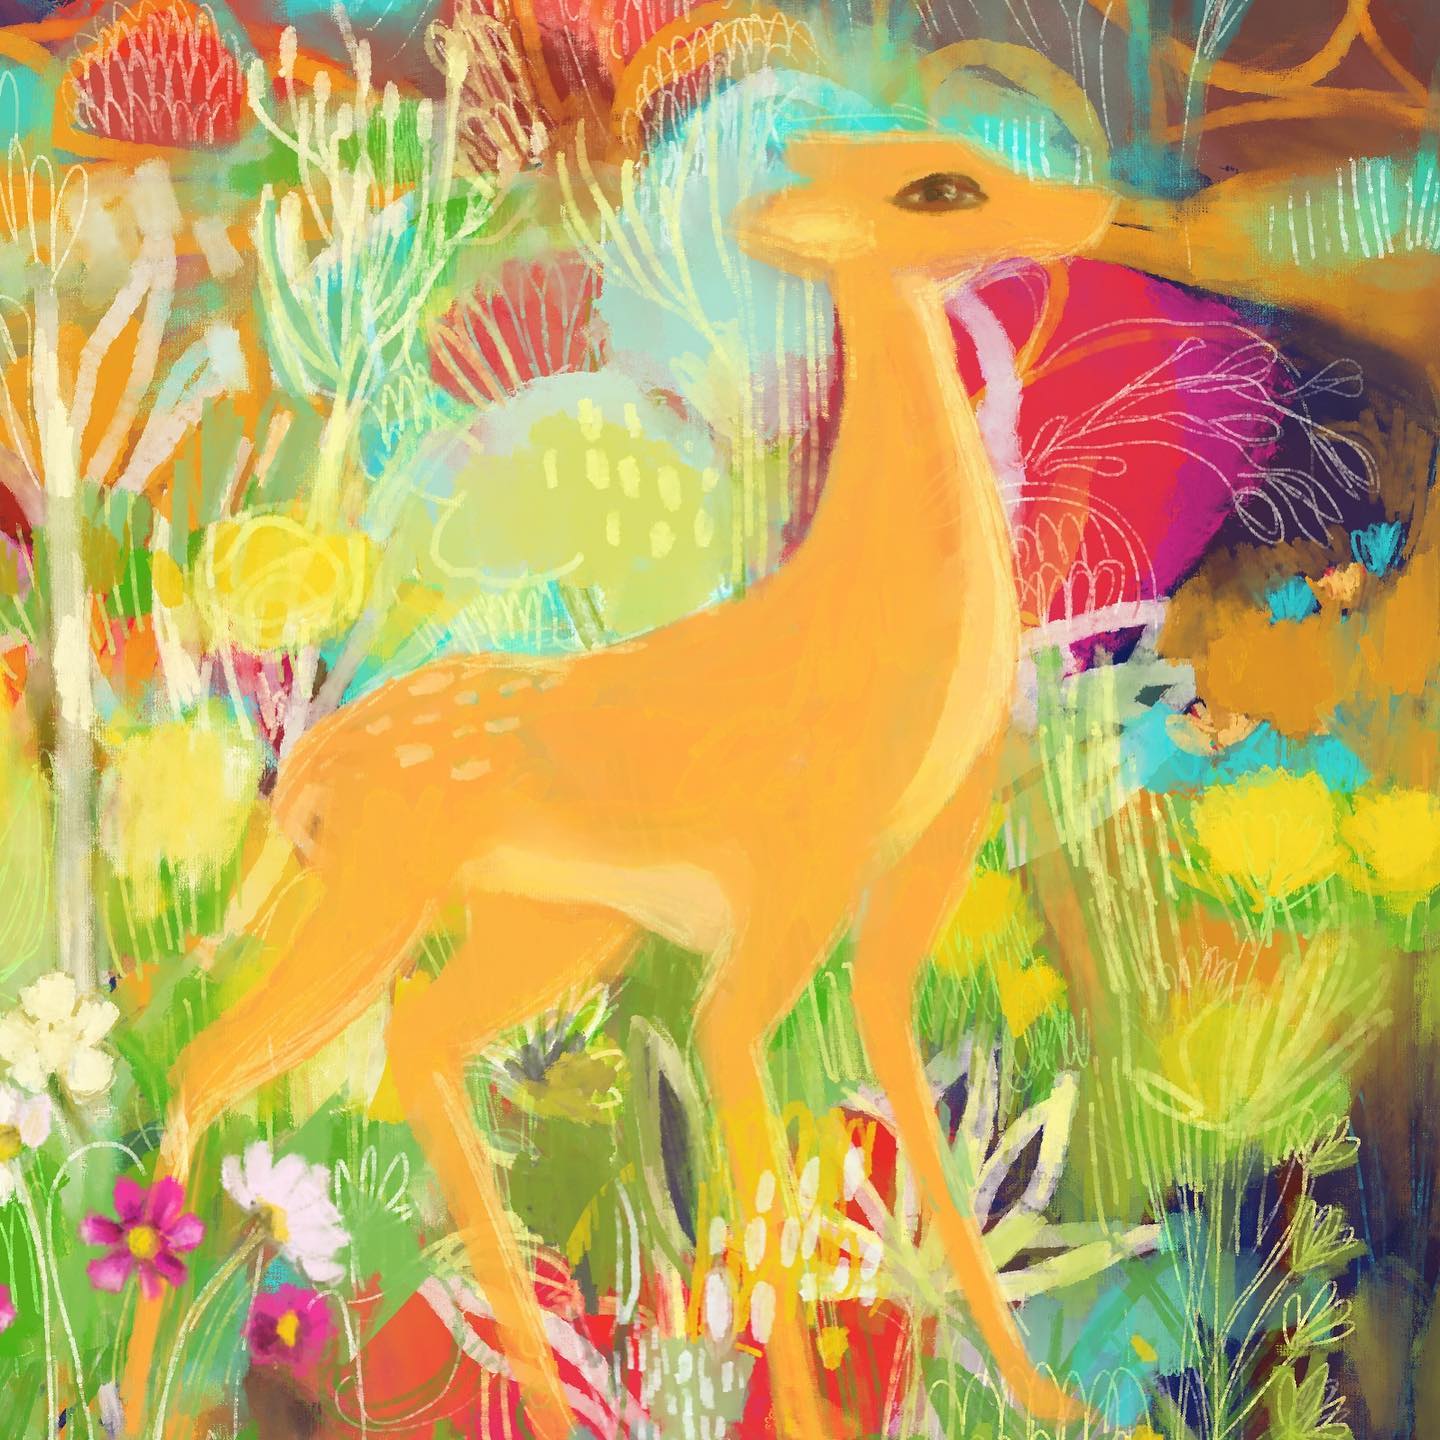 Look who showed up on my digital canvas today! The deer is a powerful spirit guide and can be a sign that you're on the right path in life.